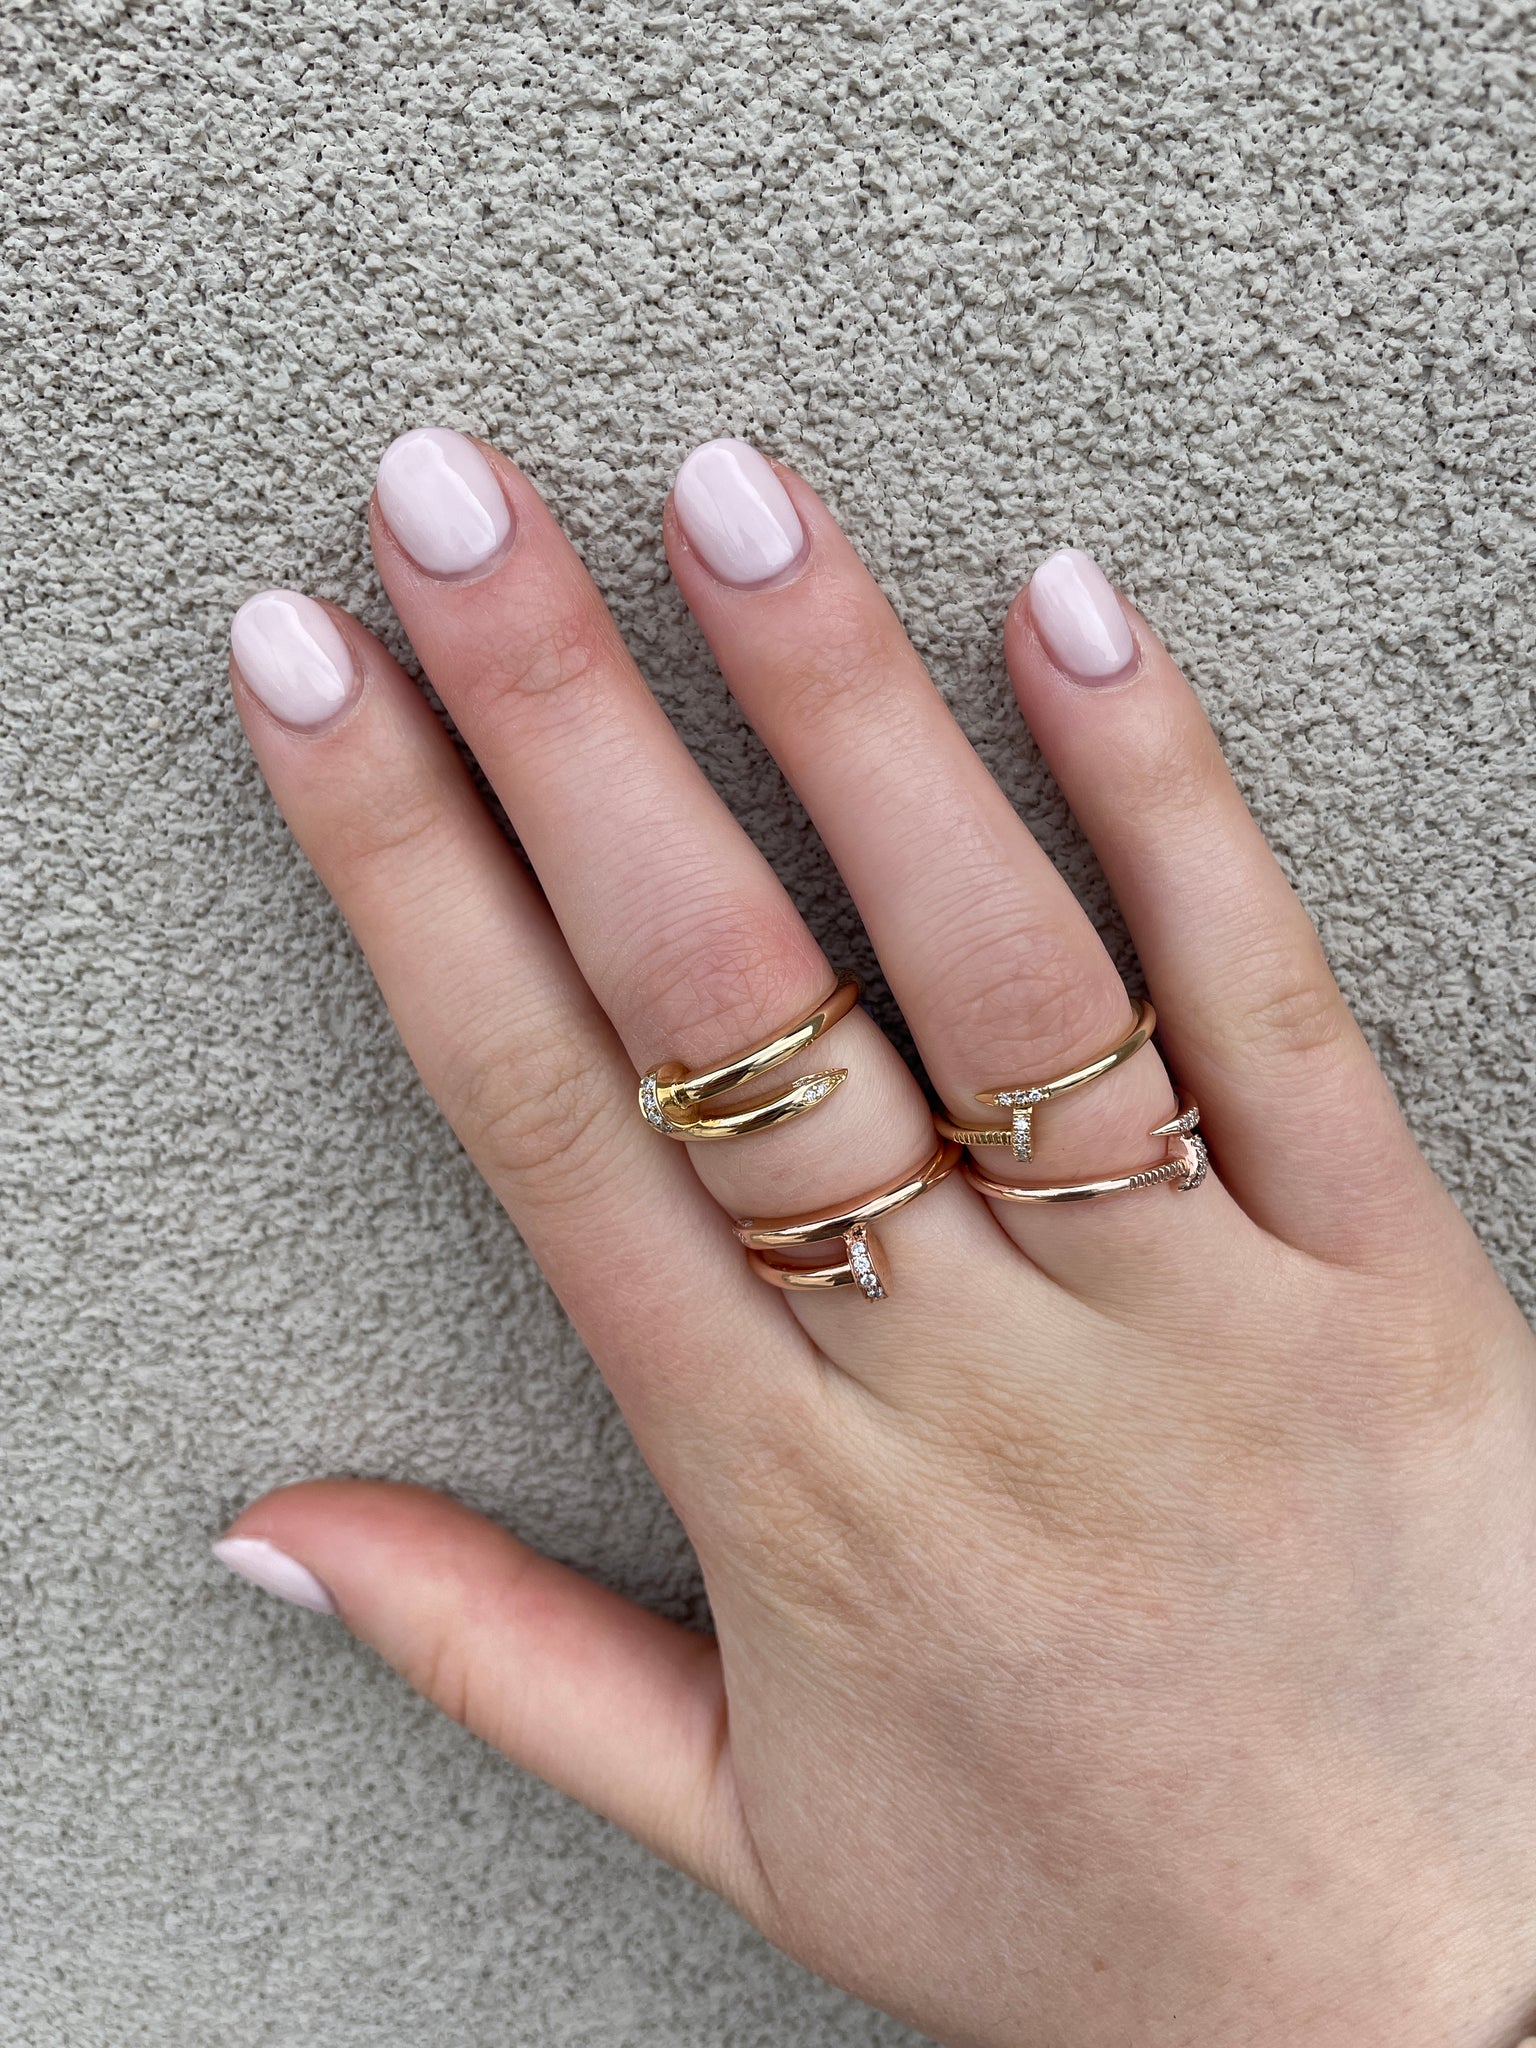 Spiral Nail Ring / 14k Gold Spiral Nail Screw Minimalist Ring / Open Nail  Ring / Promise Best Friends Ring / Construction Rose Gold Ring